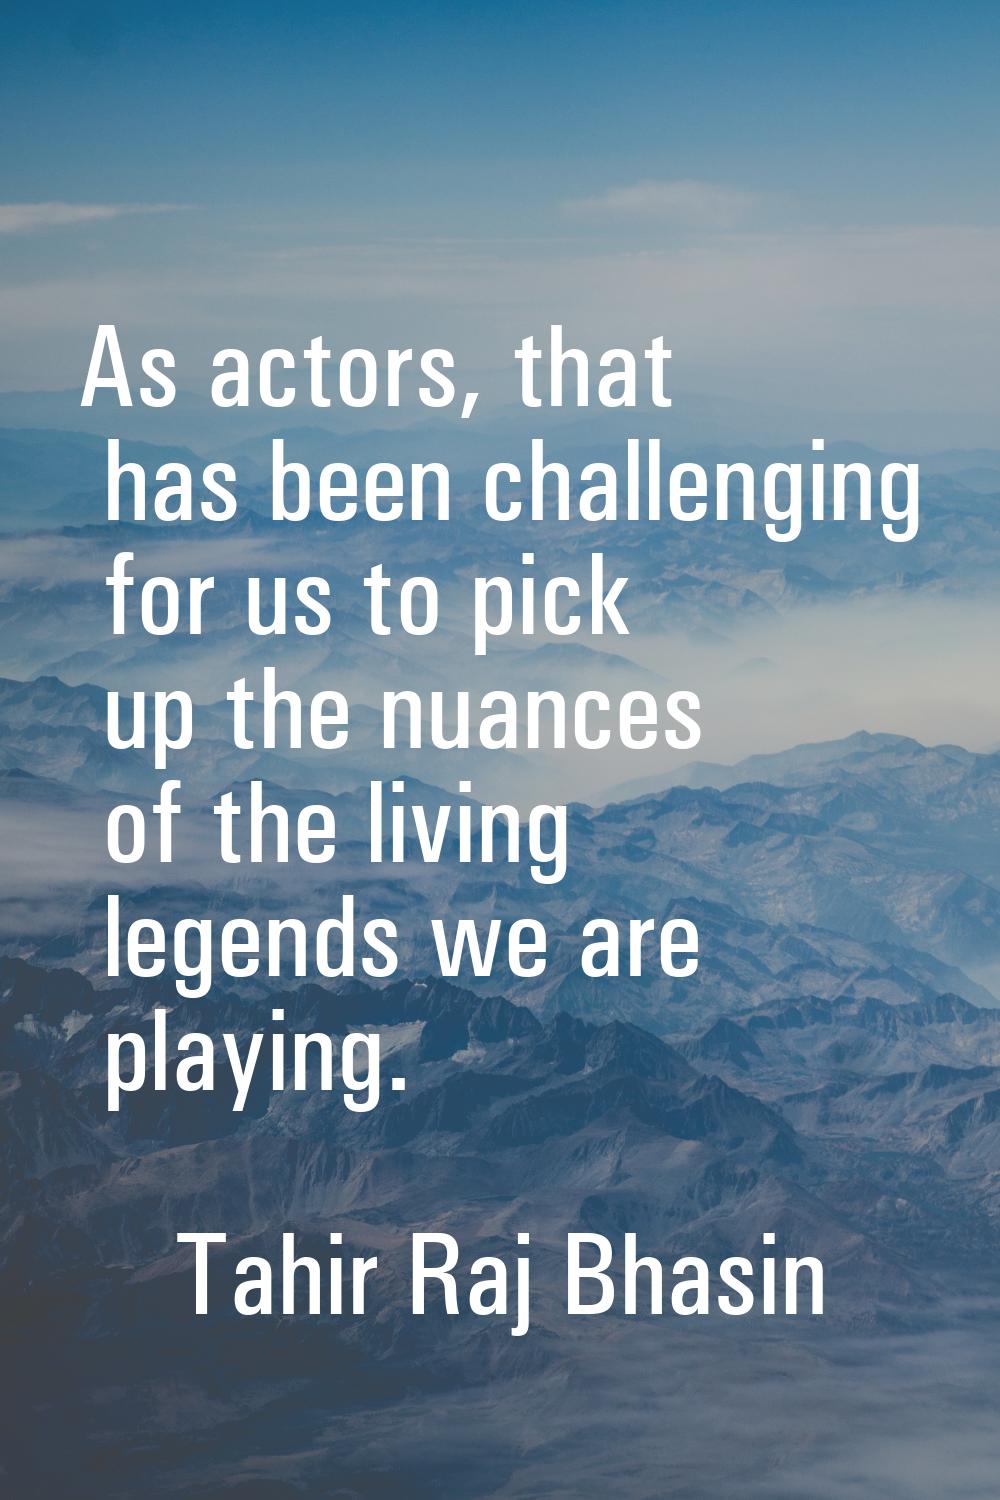 As actors, that has been challenging for us to pick up the nuances of the living legends we are pla